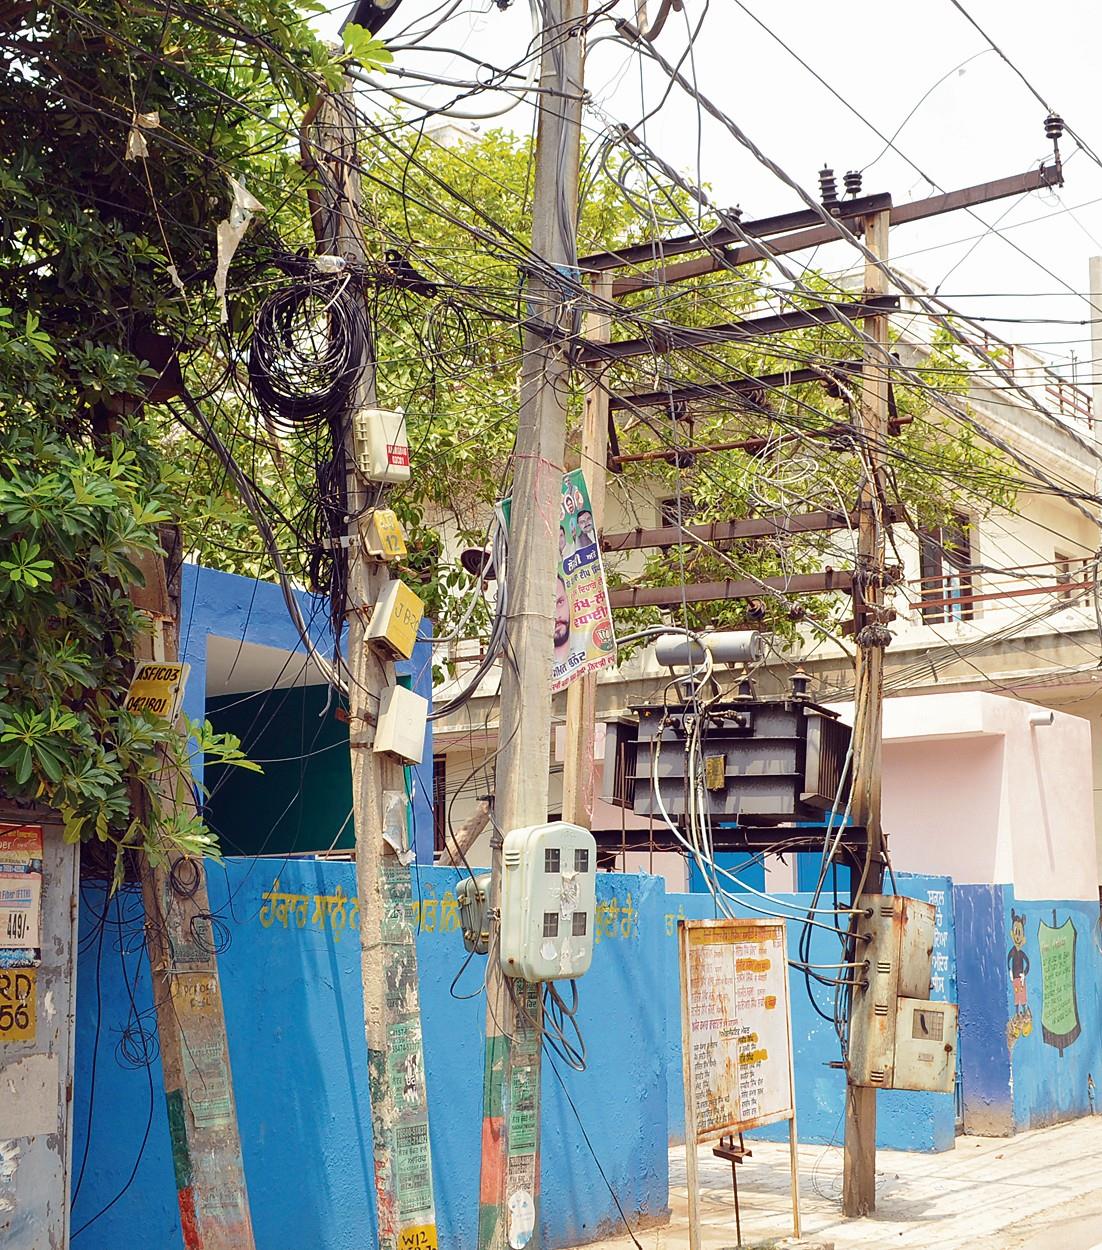 Transformer, maze of wires a safety risk at school entrance